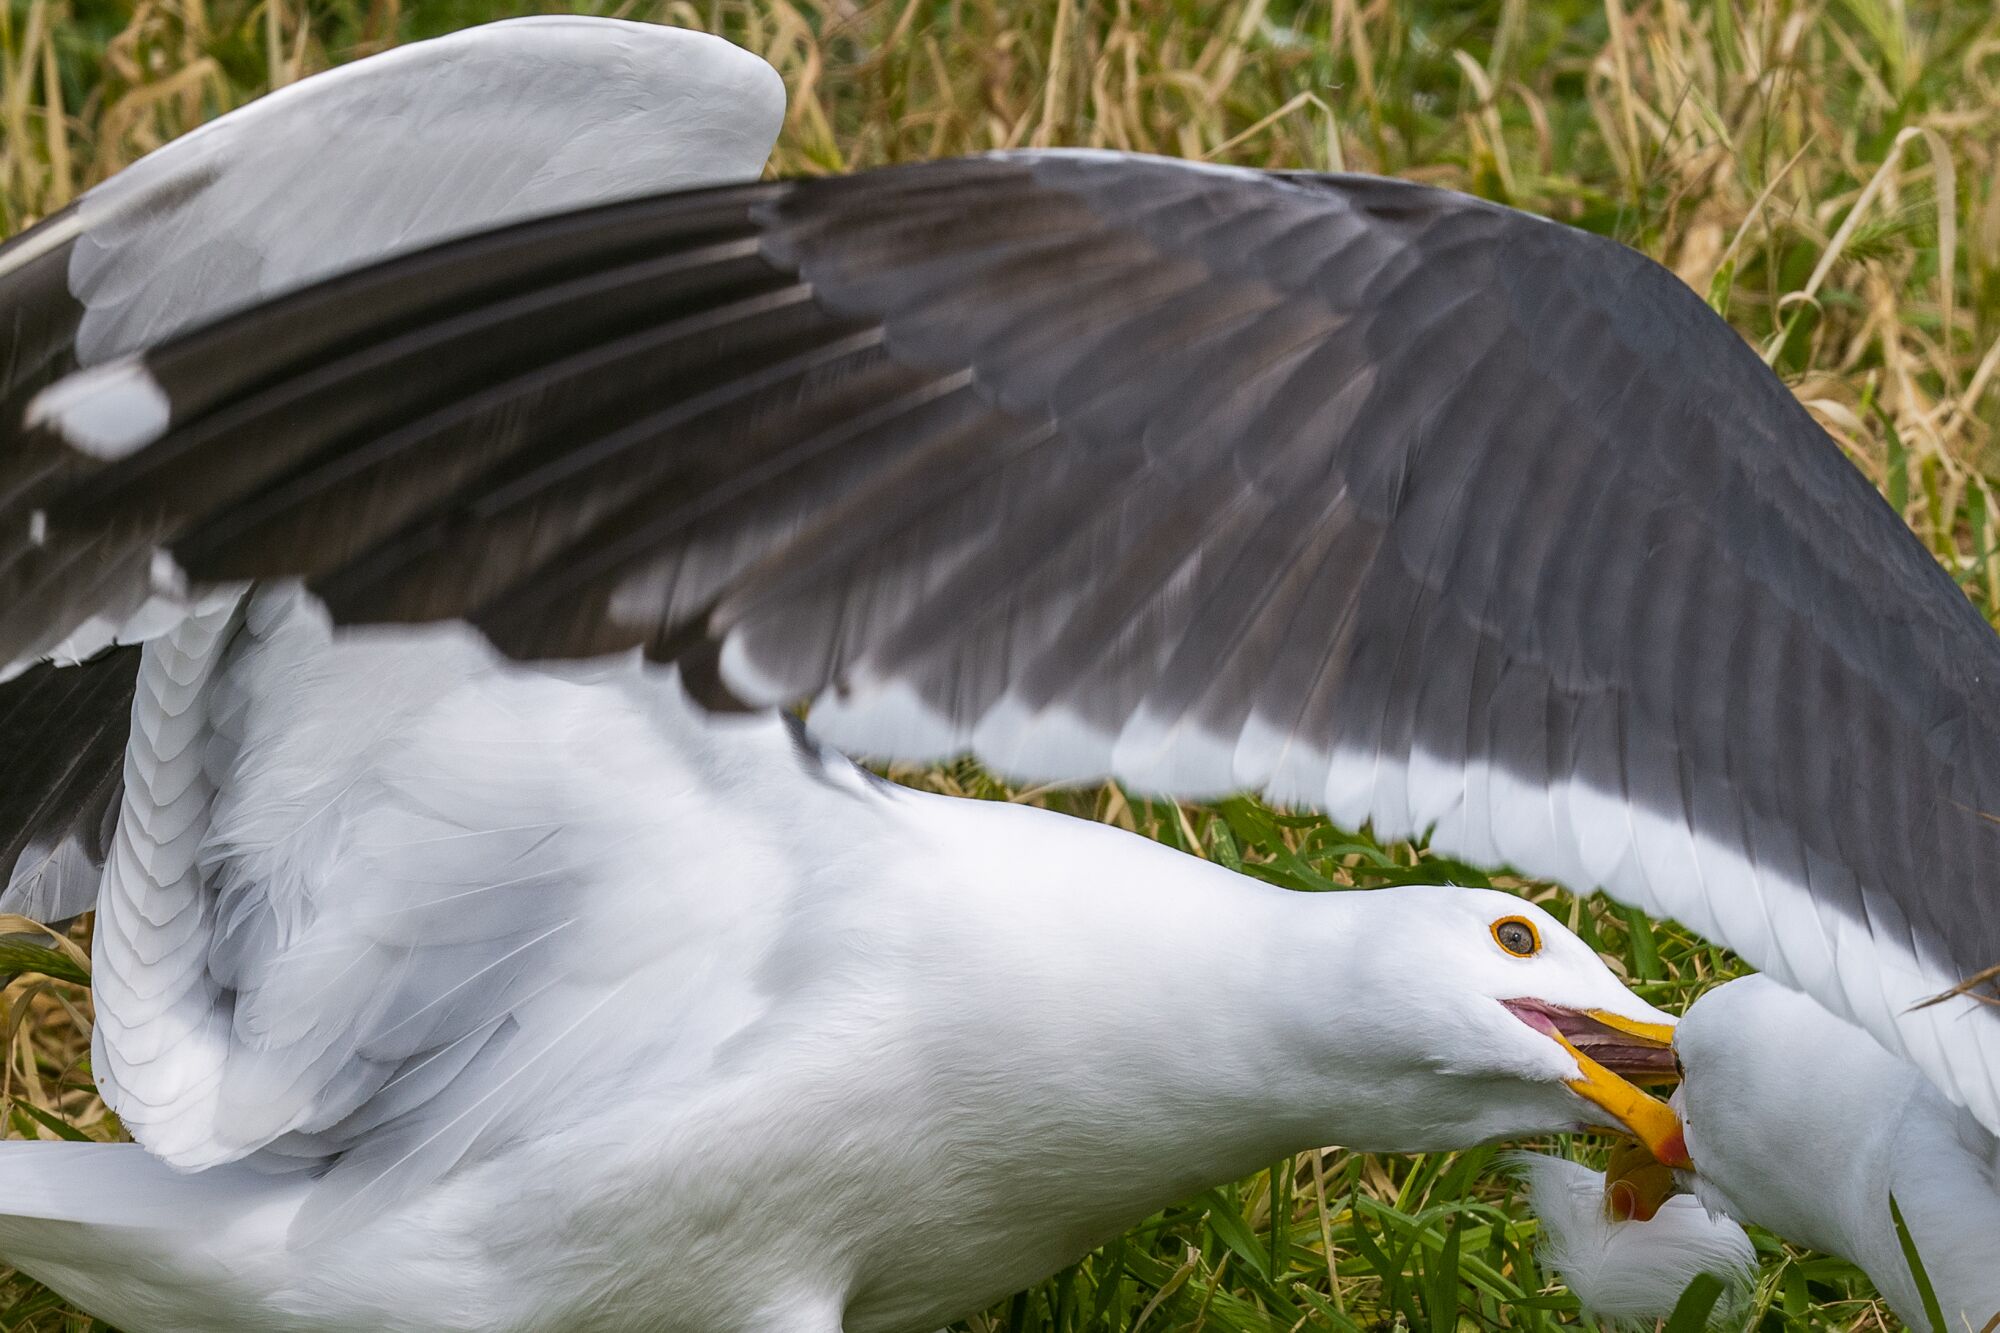 Two western gulls fight viciously over a feather, presumably to adorn their nests for the coming egg-laying season.